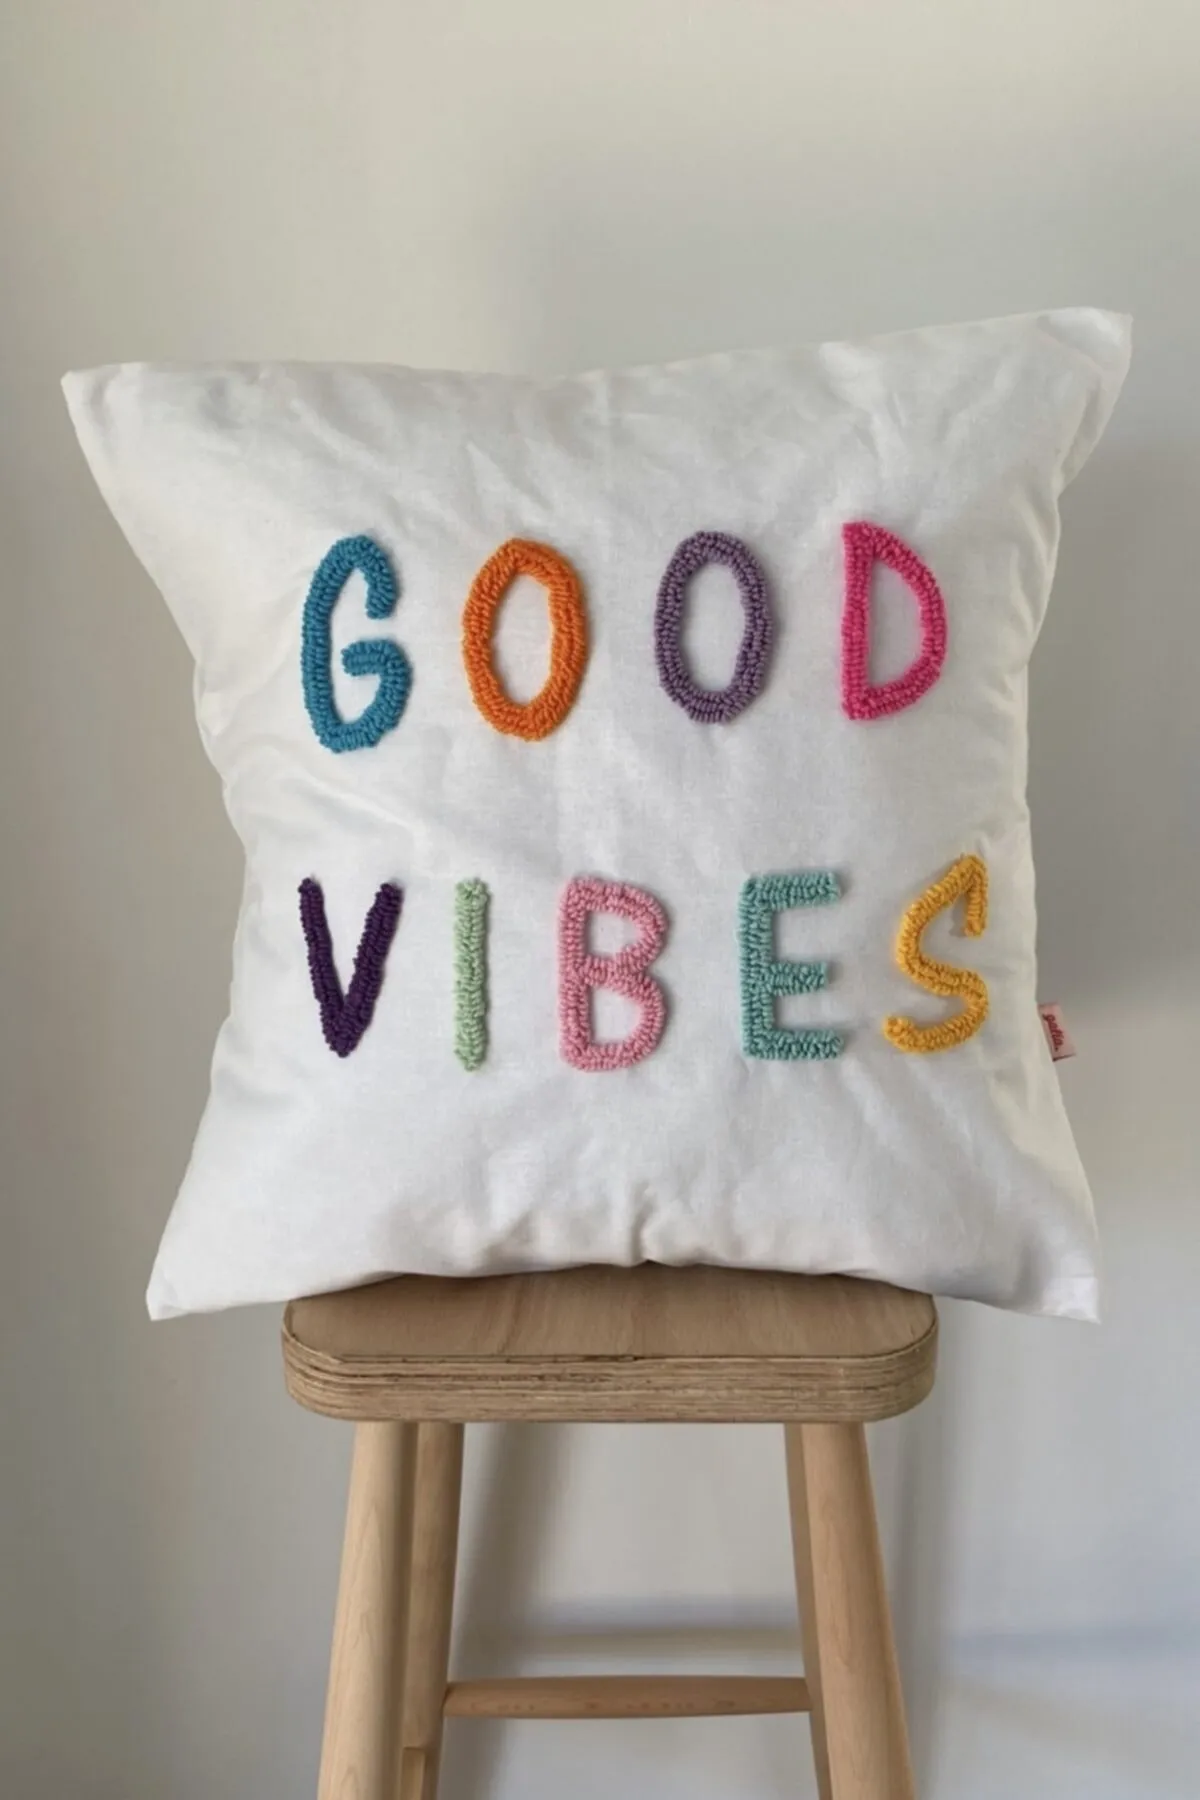 Good Vibes Motto Punch Throw Pillow Cover